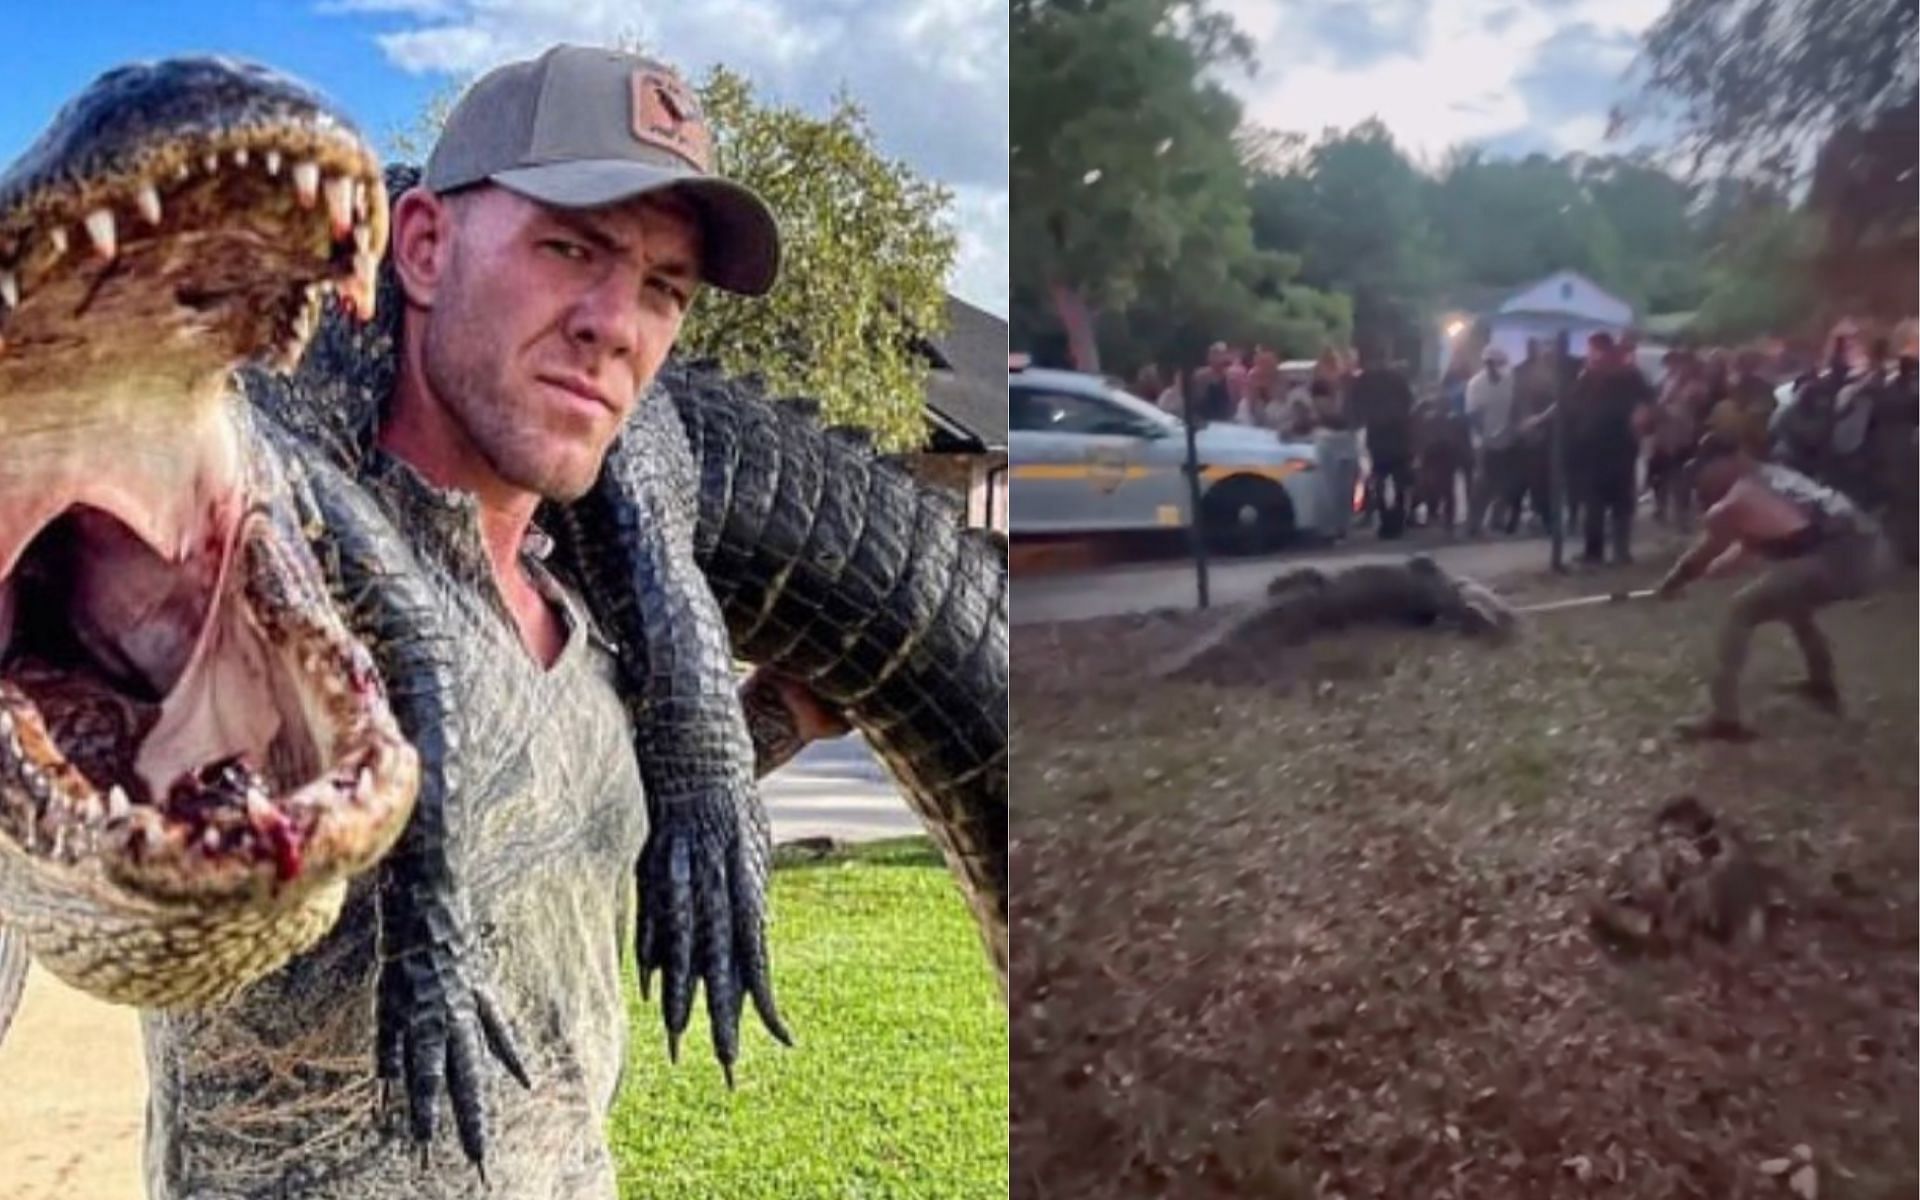 Mike Dragich [Left] Dragich wrangling an alligator [Right] [Images courtesy: @bluecollar_brawler (Instagram)]